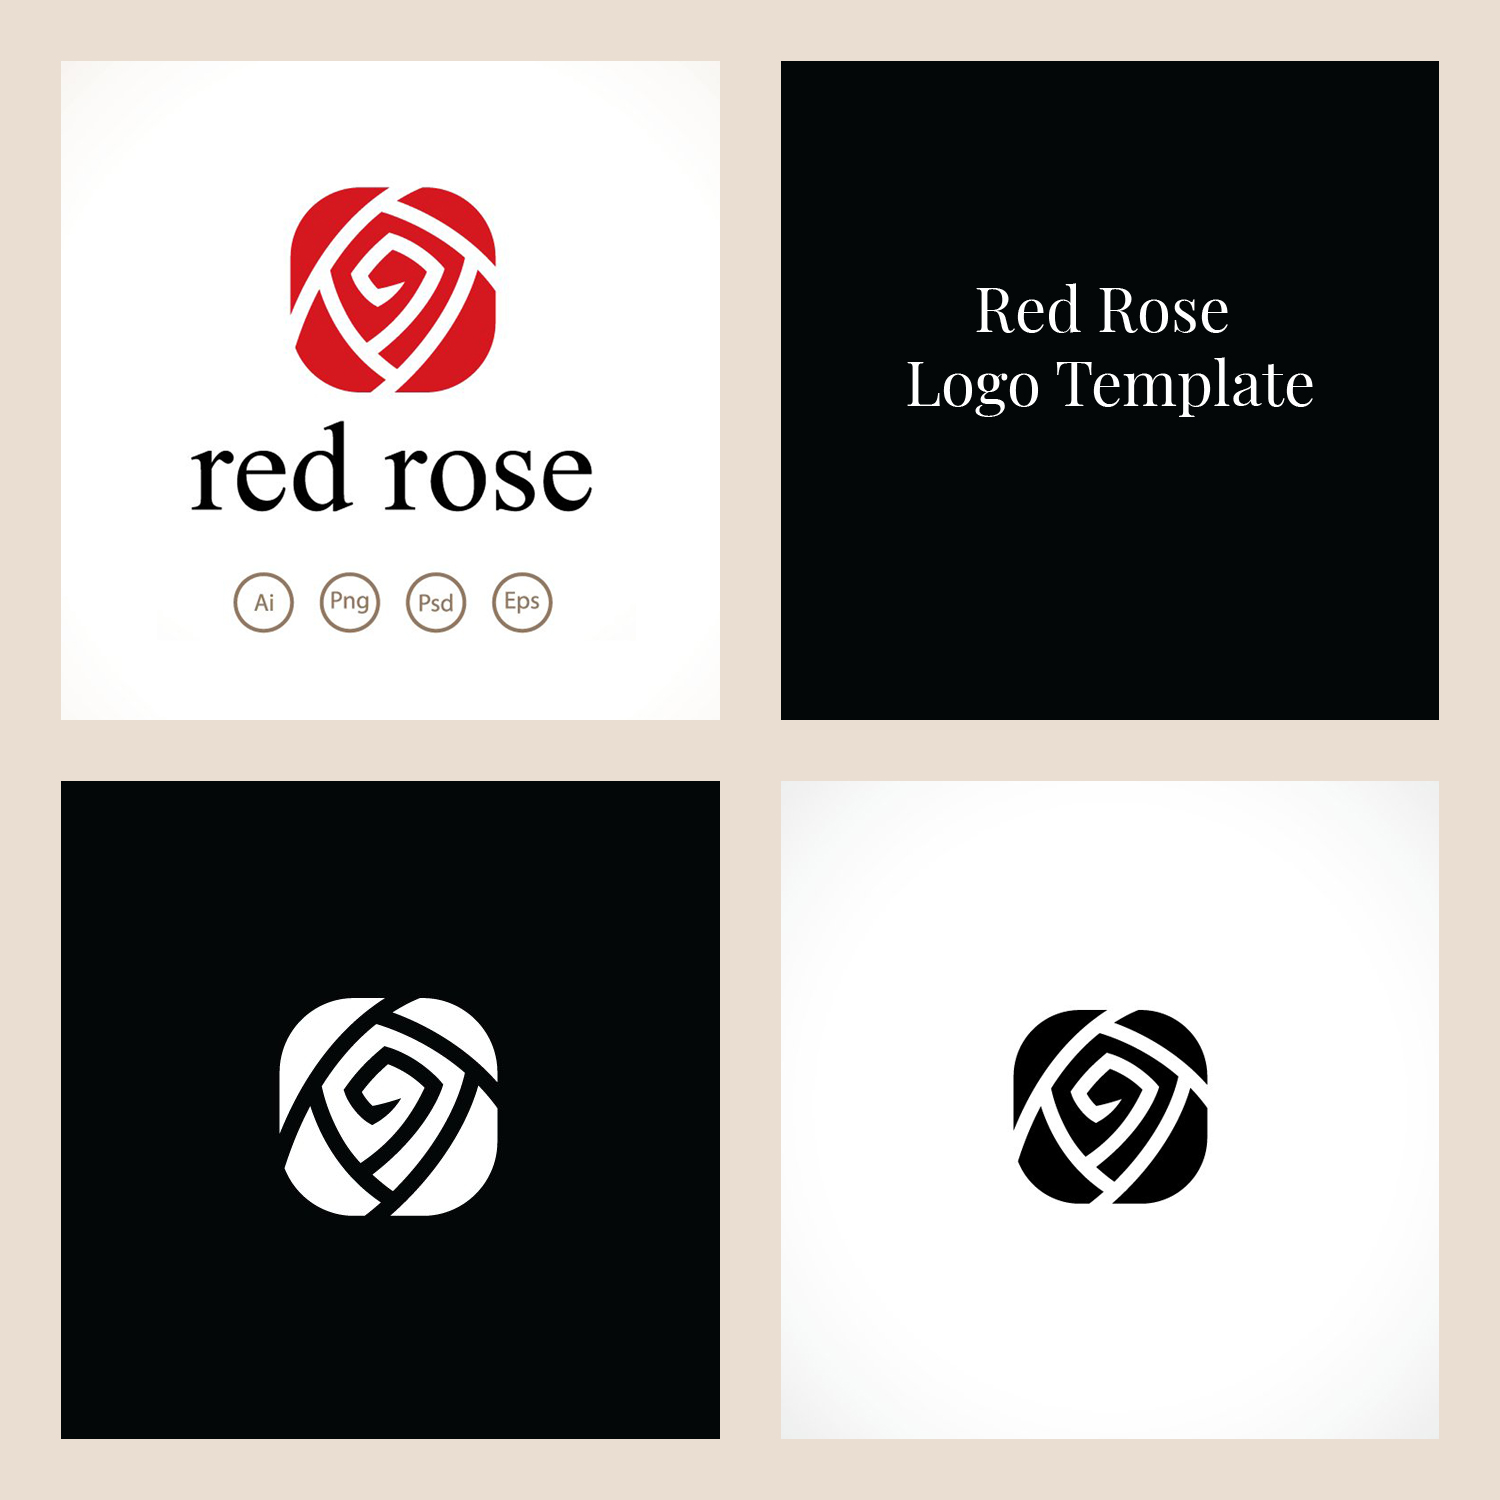 Red rose logo template preview.